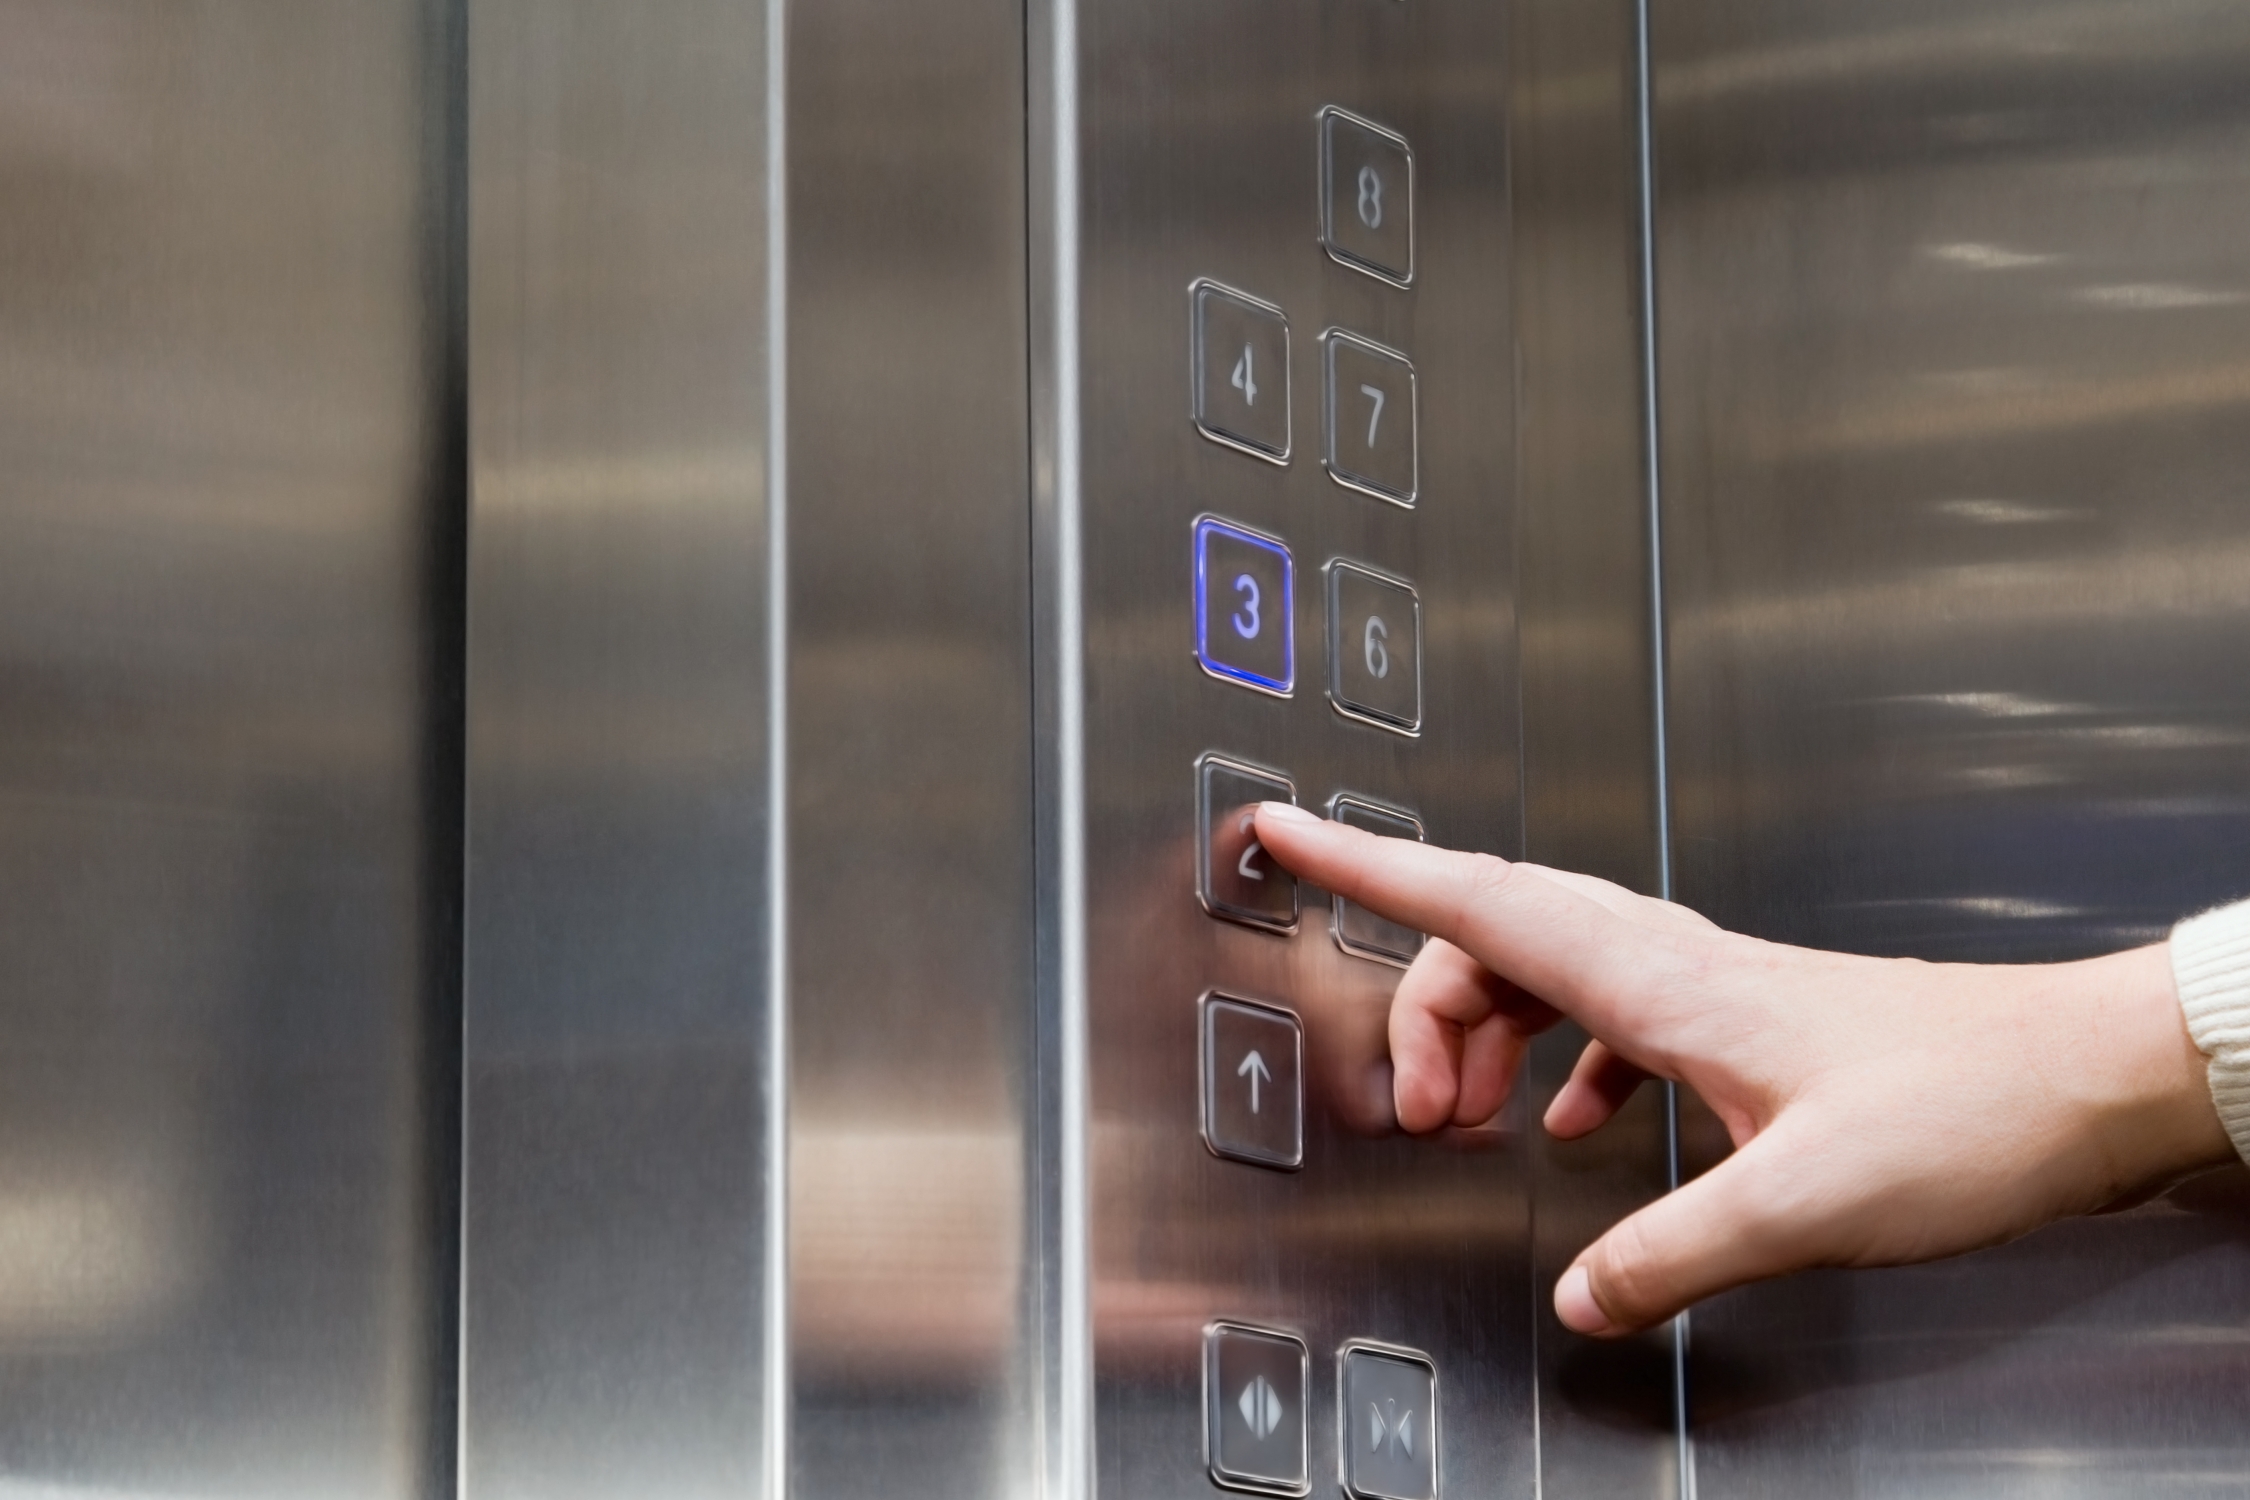 Who doesn't like a working elevator? Keep it that way with the Electric Elevator Pads!